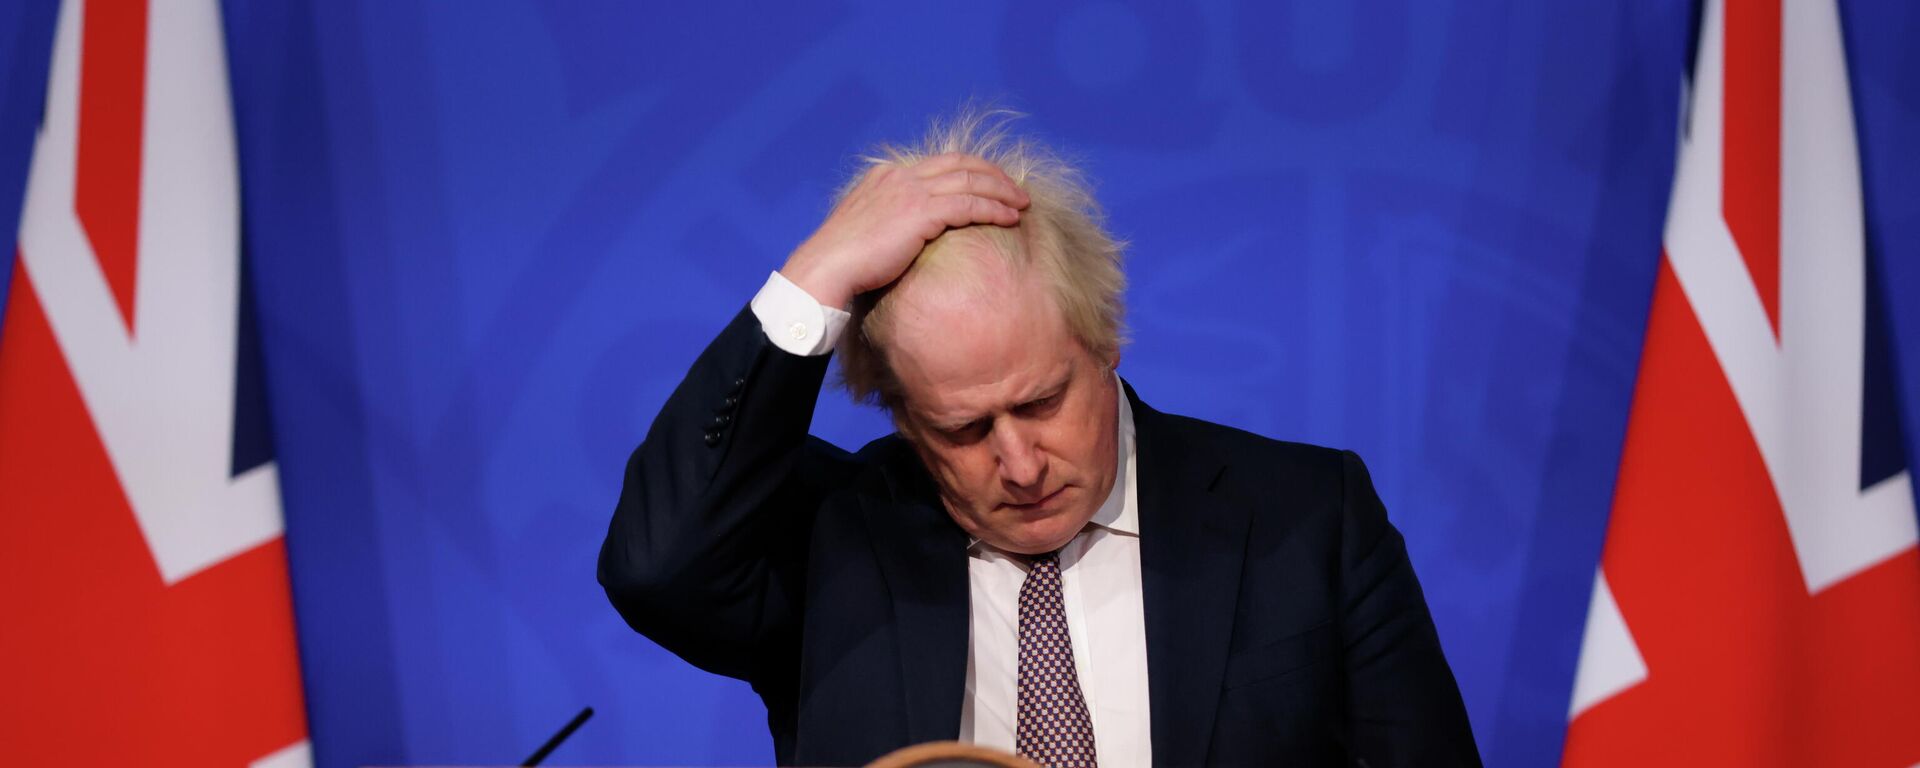 Britain's Prime Minister Boris Johnson gestures as he speaks during a press conference in London, Saturday Nov. 27, 2021, after cases of the new COVID-19 variant were confirmed in the UK - Sputnik International, 1920, 29.11.2021